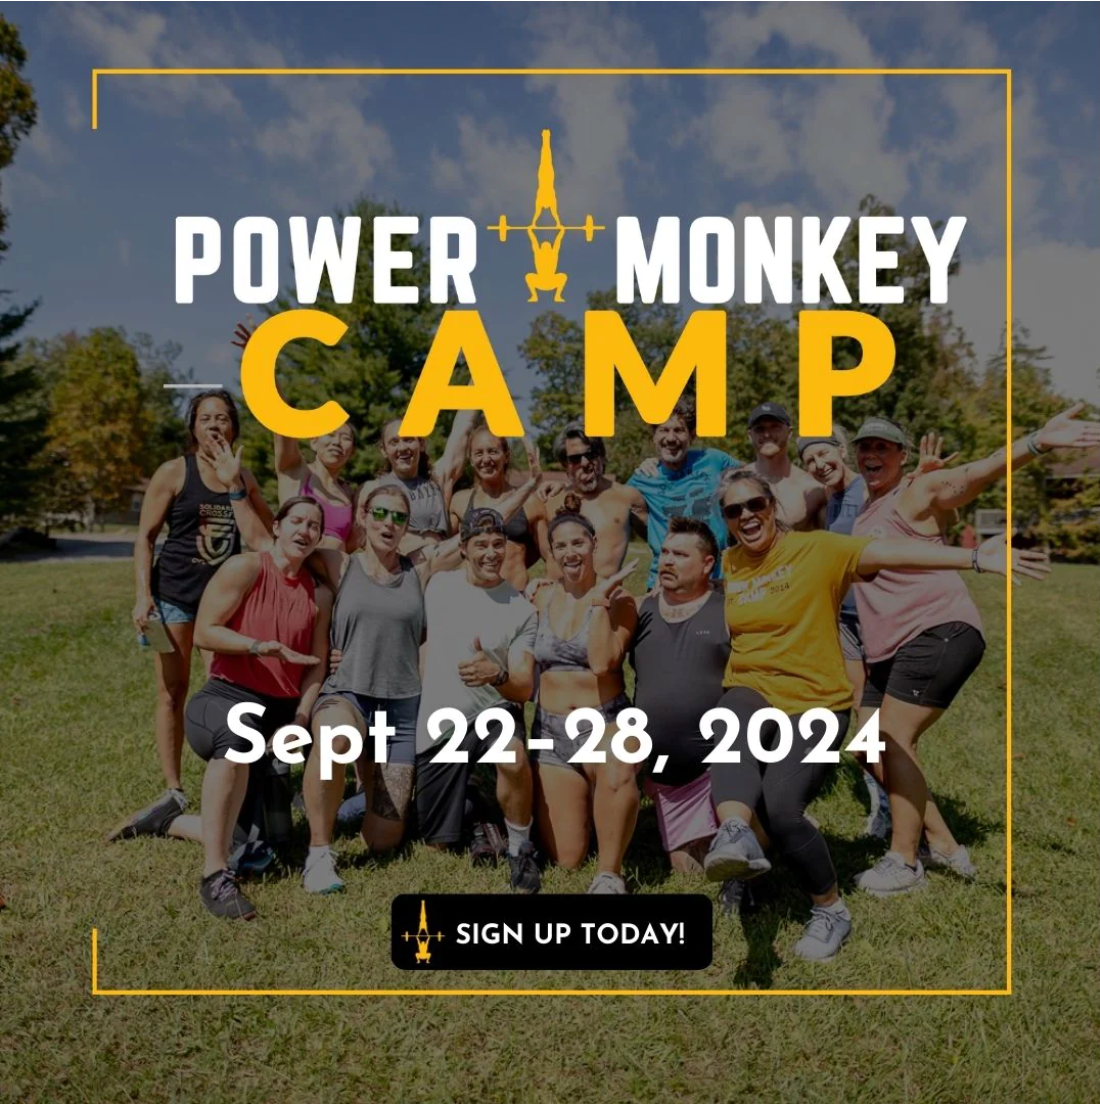 Photo of a group of campers to promote Power Monkey Camp. Text says Power Monkey Camp Sept. 22-28, 2024.